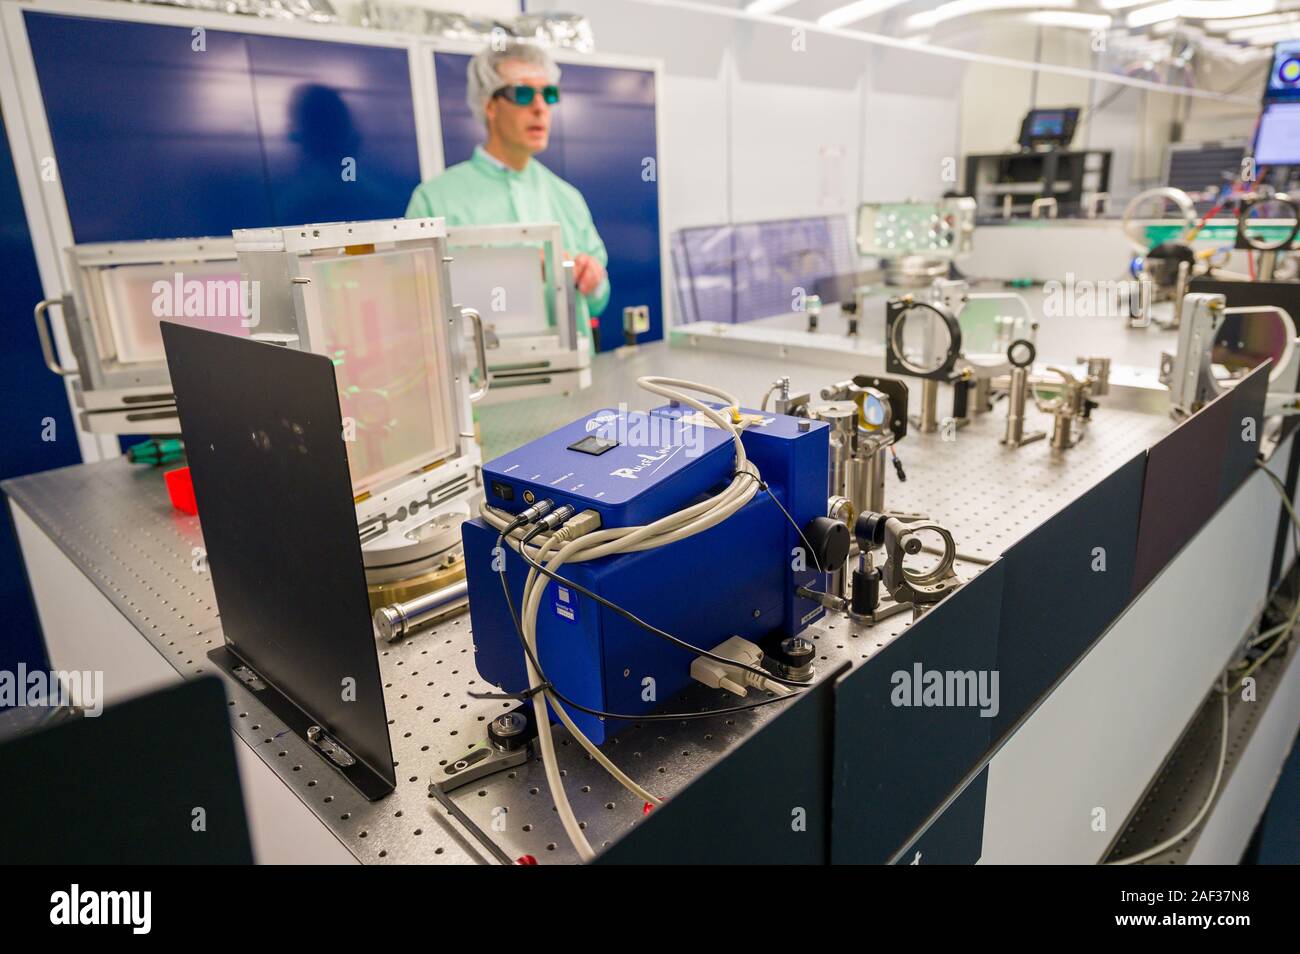 12 December 2019, Bavaria, Unterföhring: Thomas Metzger, technical director  of Trumpf Scientific Lasers, prepares the various stages of the laser for  the lightning protection research project. A European research consortium  wants to